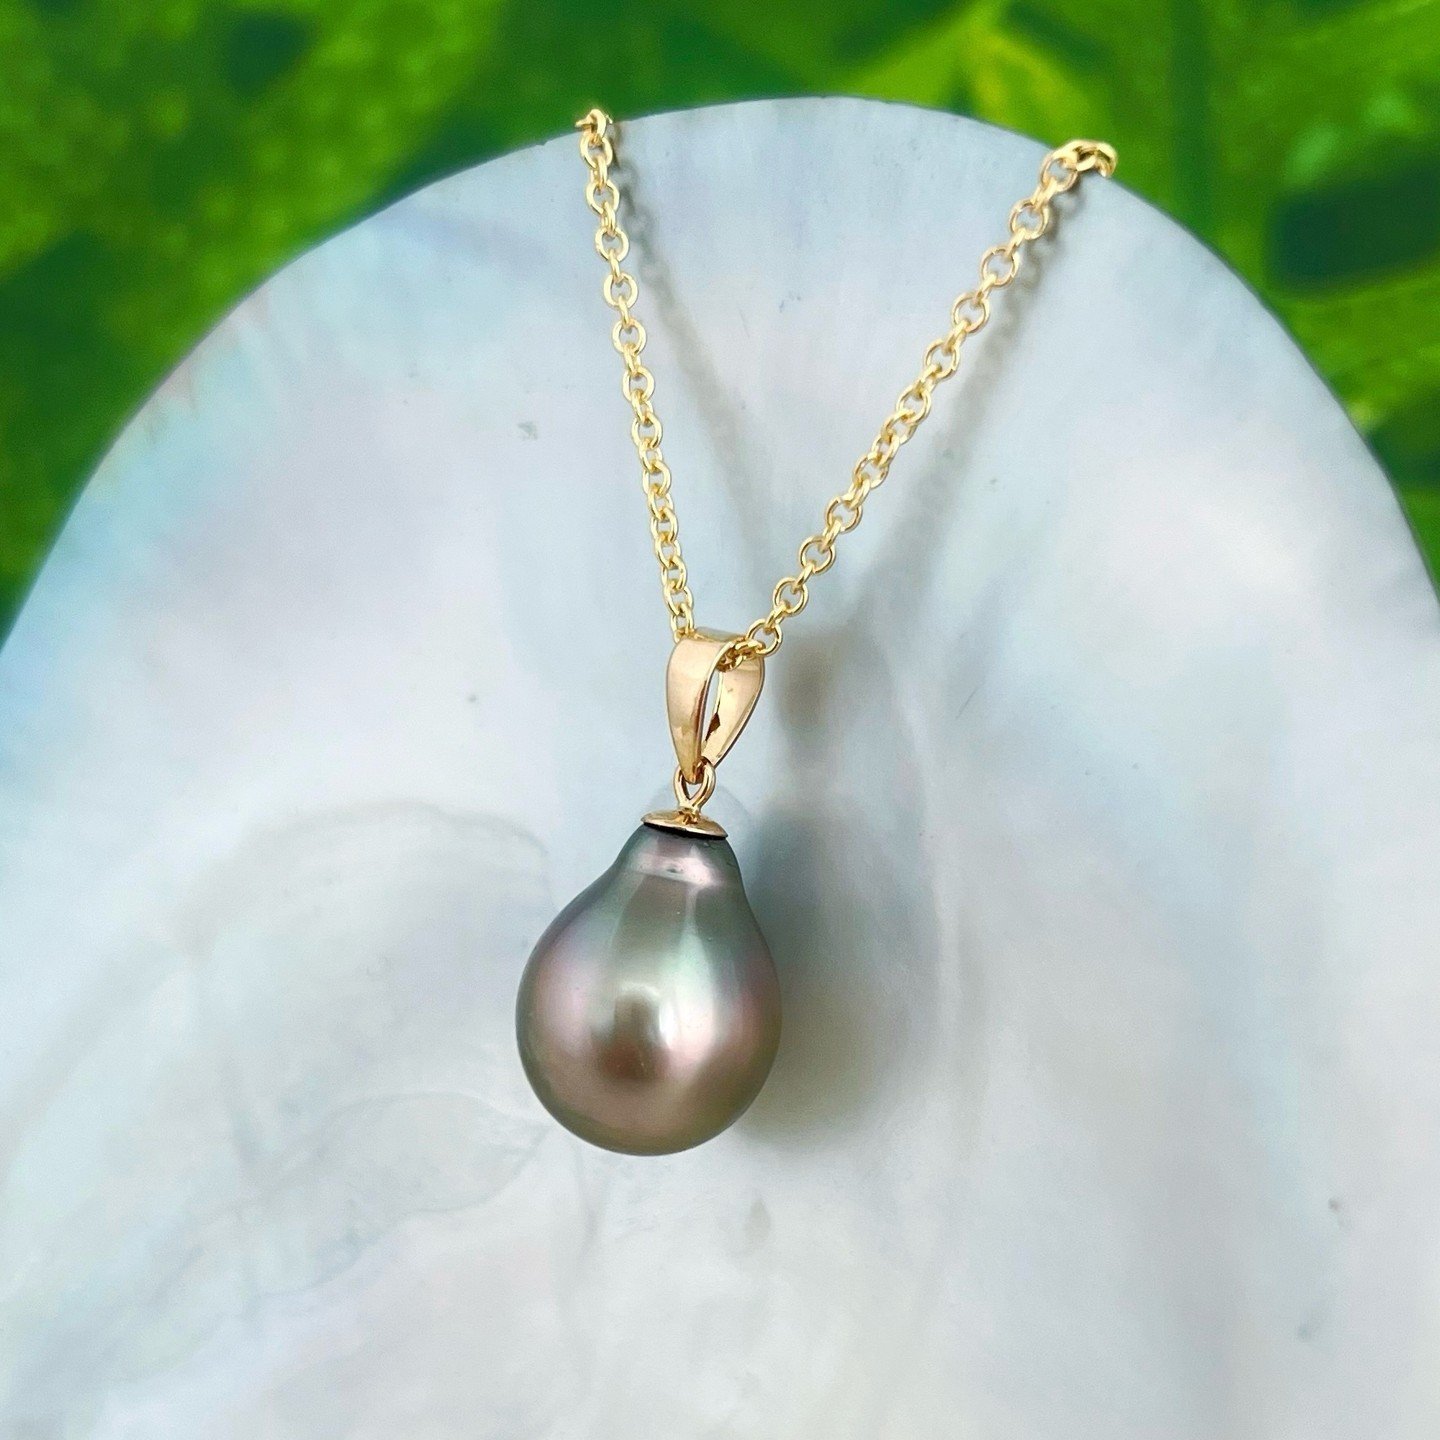 𝑪𝒉𝒂𝒎𝒑𝒂𝒈𝒏𝒆 𝑹𝒐𝒔&eacute; 🍾 

Naturally Crafted into a splendid 12.1mm teardrop shape, this flawless pearl boasts a unique fusion of gold and pink hues, making it an ideal choice for those seeking a one-of-a-kind treasure.

&bull;One and Onl